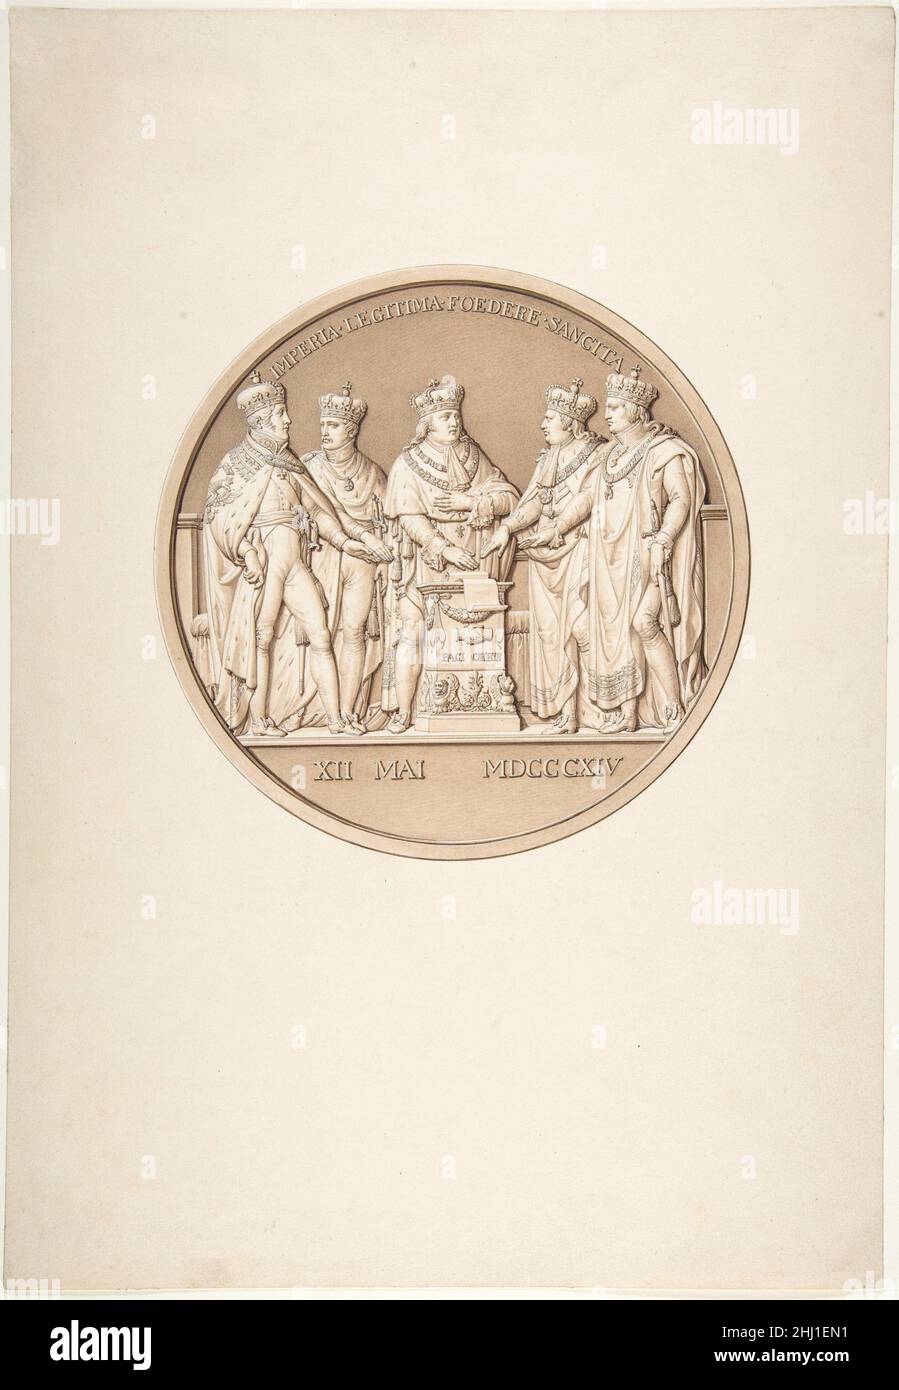 Design for a Medal Commemorating the Treaty of Paris, 1814 ca.1814 Jacques Edouard Gatteaux French This is one of the few surviving drawings by Gatteaux, an engraver of medals. His delicate use of line and wash recalls the technique of his lifelong friend Jean Auguste Dominique Ingres. The design commemorates the Treaty of Paris of 1814, signed by the French king Louis XVIII and other European leaders following the abdication and exile of Emperor Napoleon I.. Design for a Medal Commemorating the Treaty of Paris, 1814  337166 Stock Photo